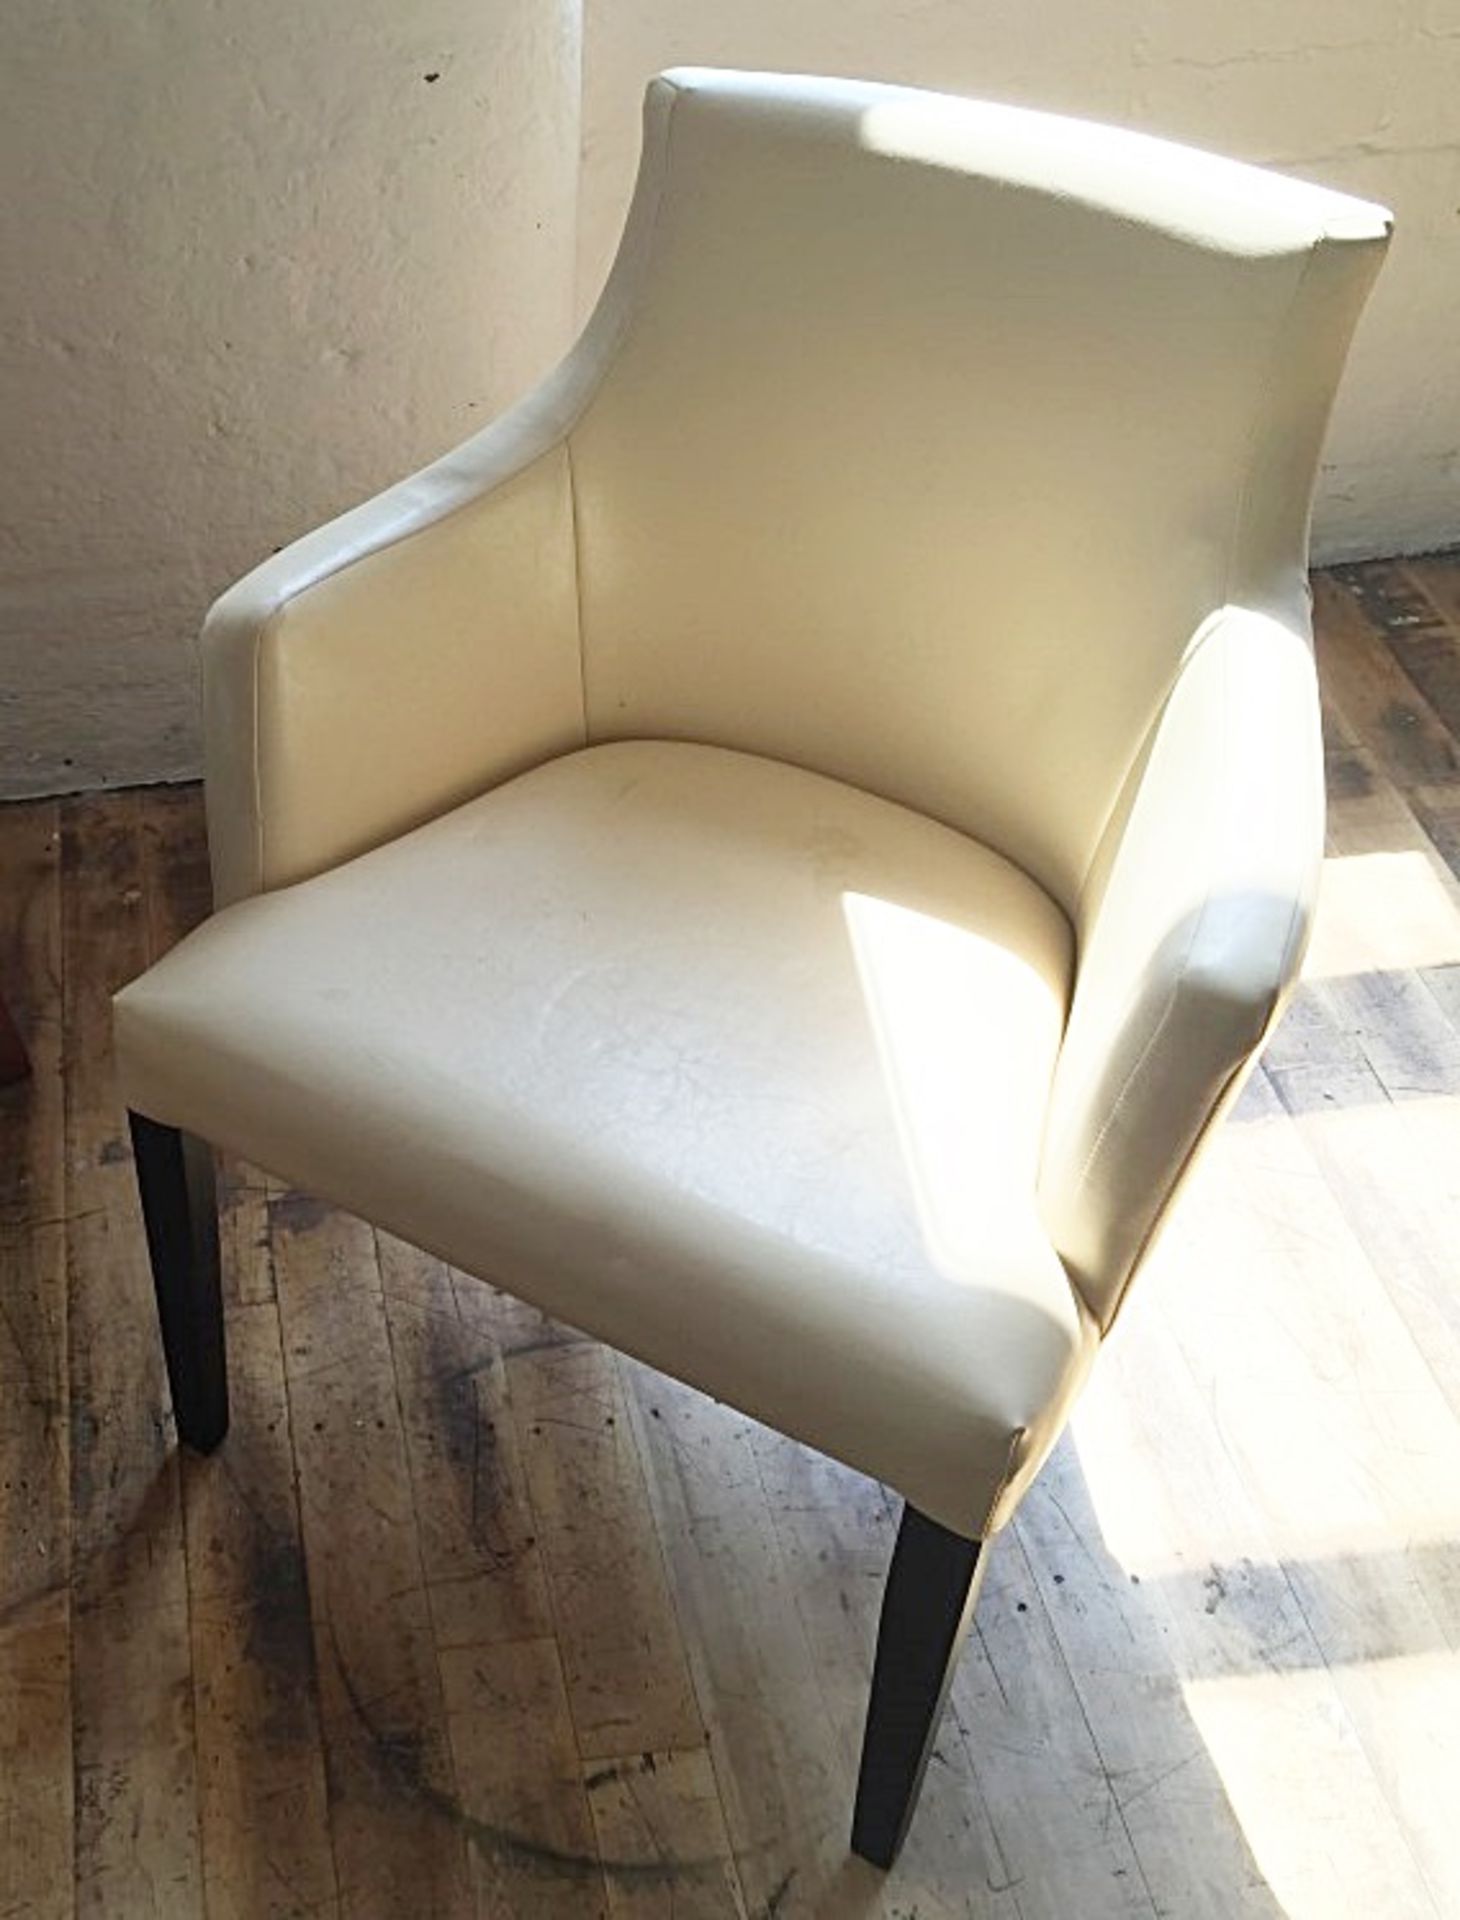 1 x Faux Leather Chair In Cream - Ref: NDE016B - CL122 - Location: Bury BL8 All furniture items